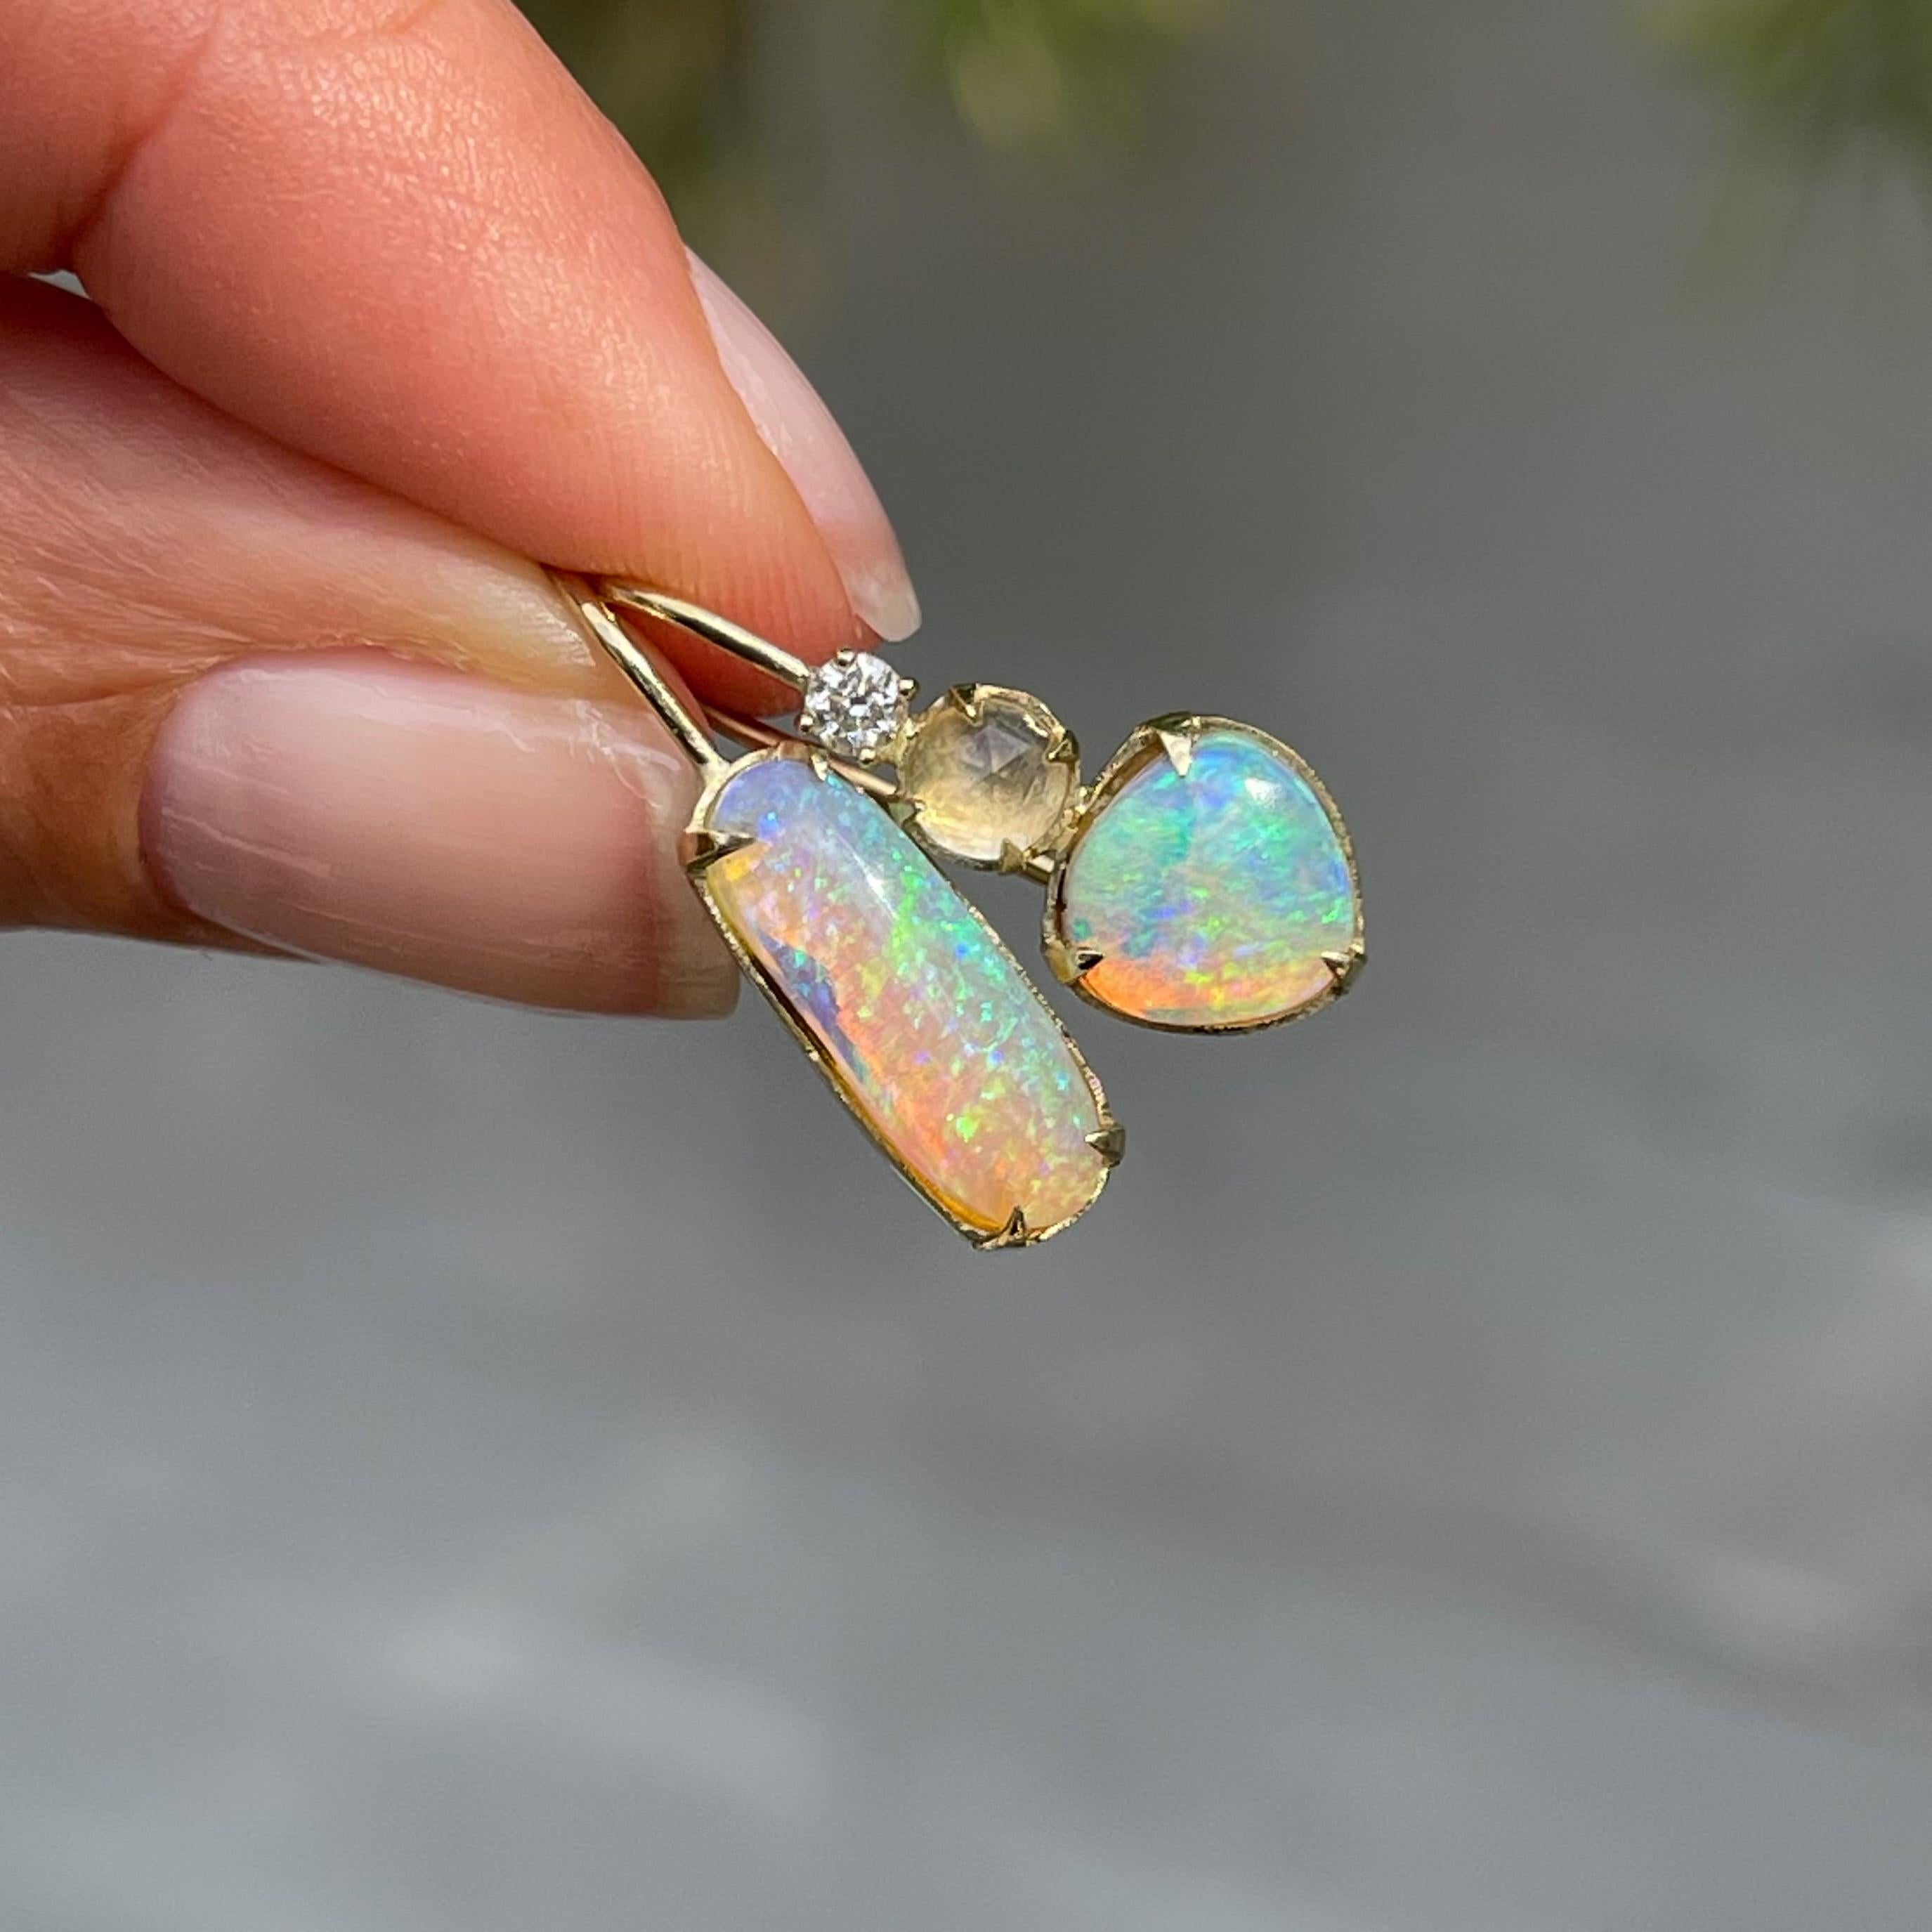 The Dalliance Crystal Pipe Opal Drop Earrings marry crystal opal and blue moonstone in a mystical affair.  Two green crystal opals flicker with intensity, while shades of pink and purple glow through their forms.  On the left, a single oval opal